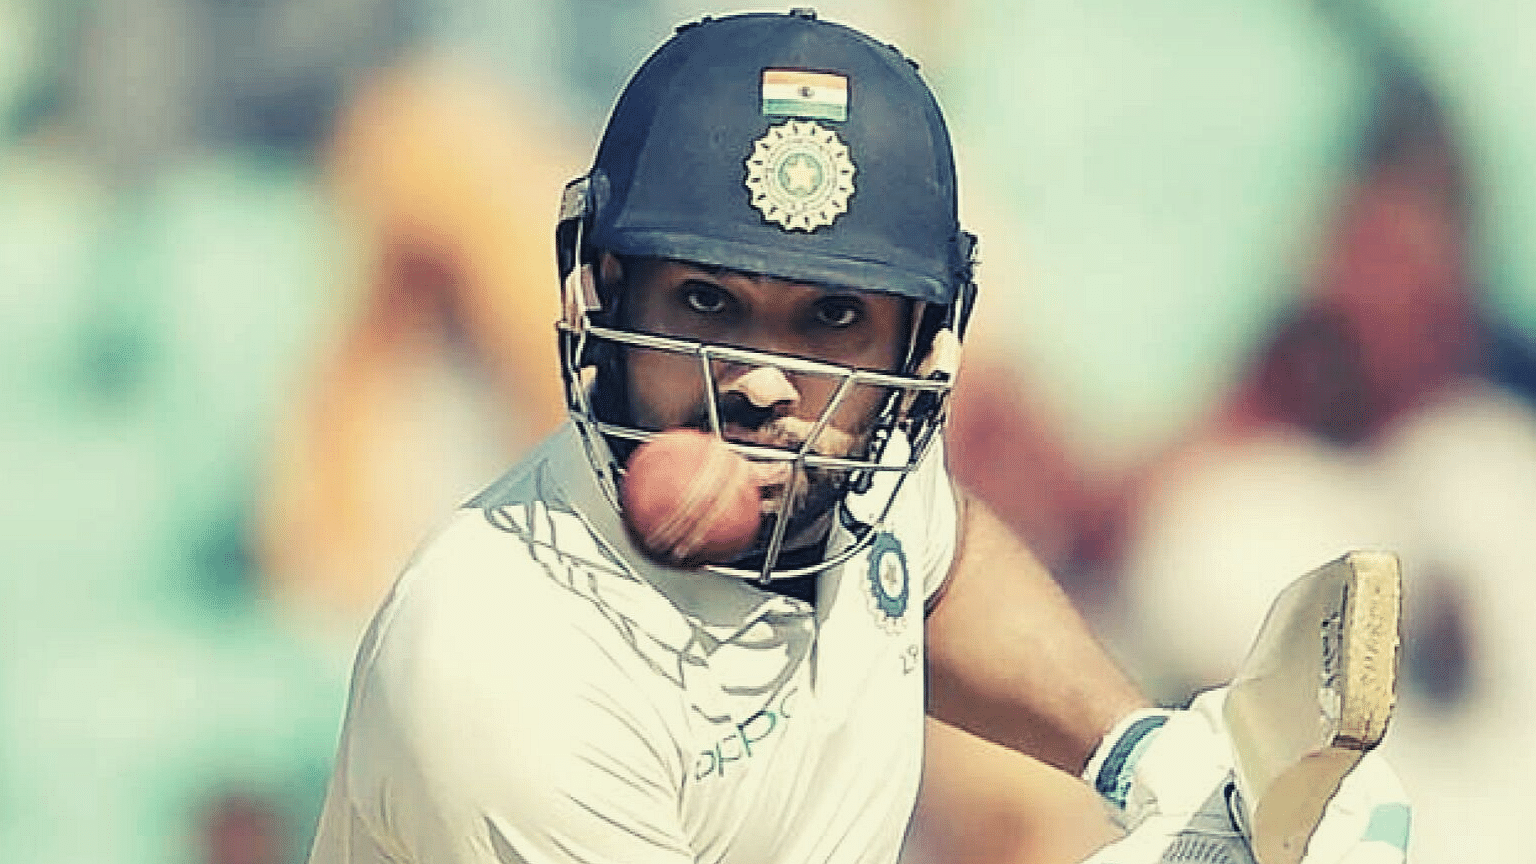 Rohit Sharma was named in the 15-man squad against South Africa for the three-match Test series on Thursday.